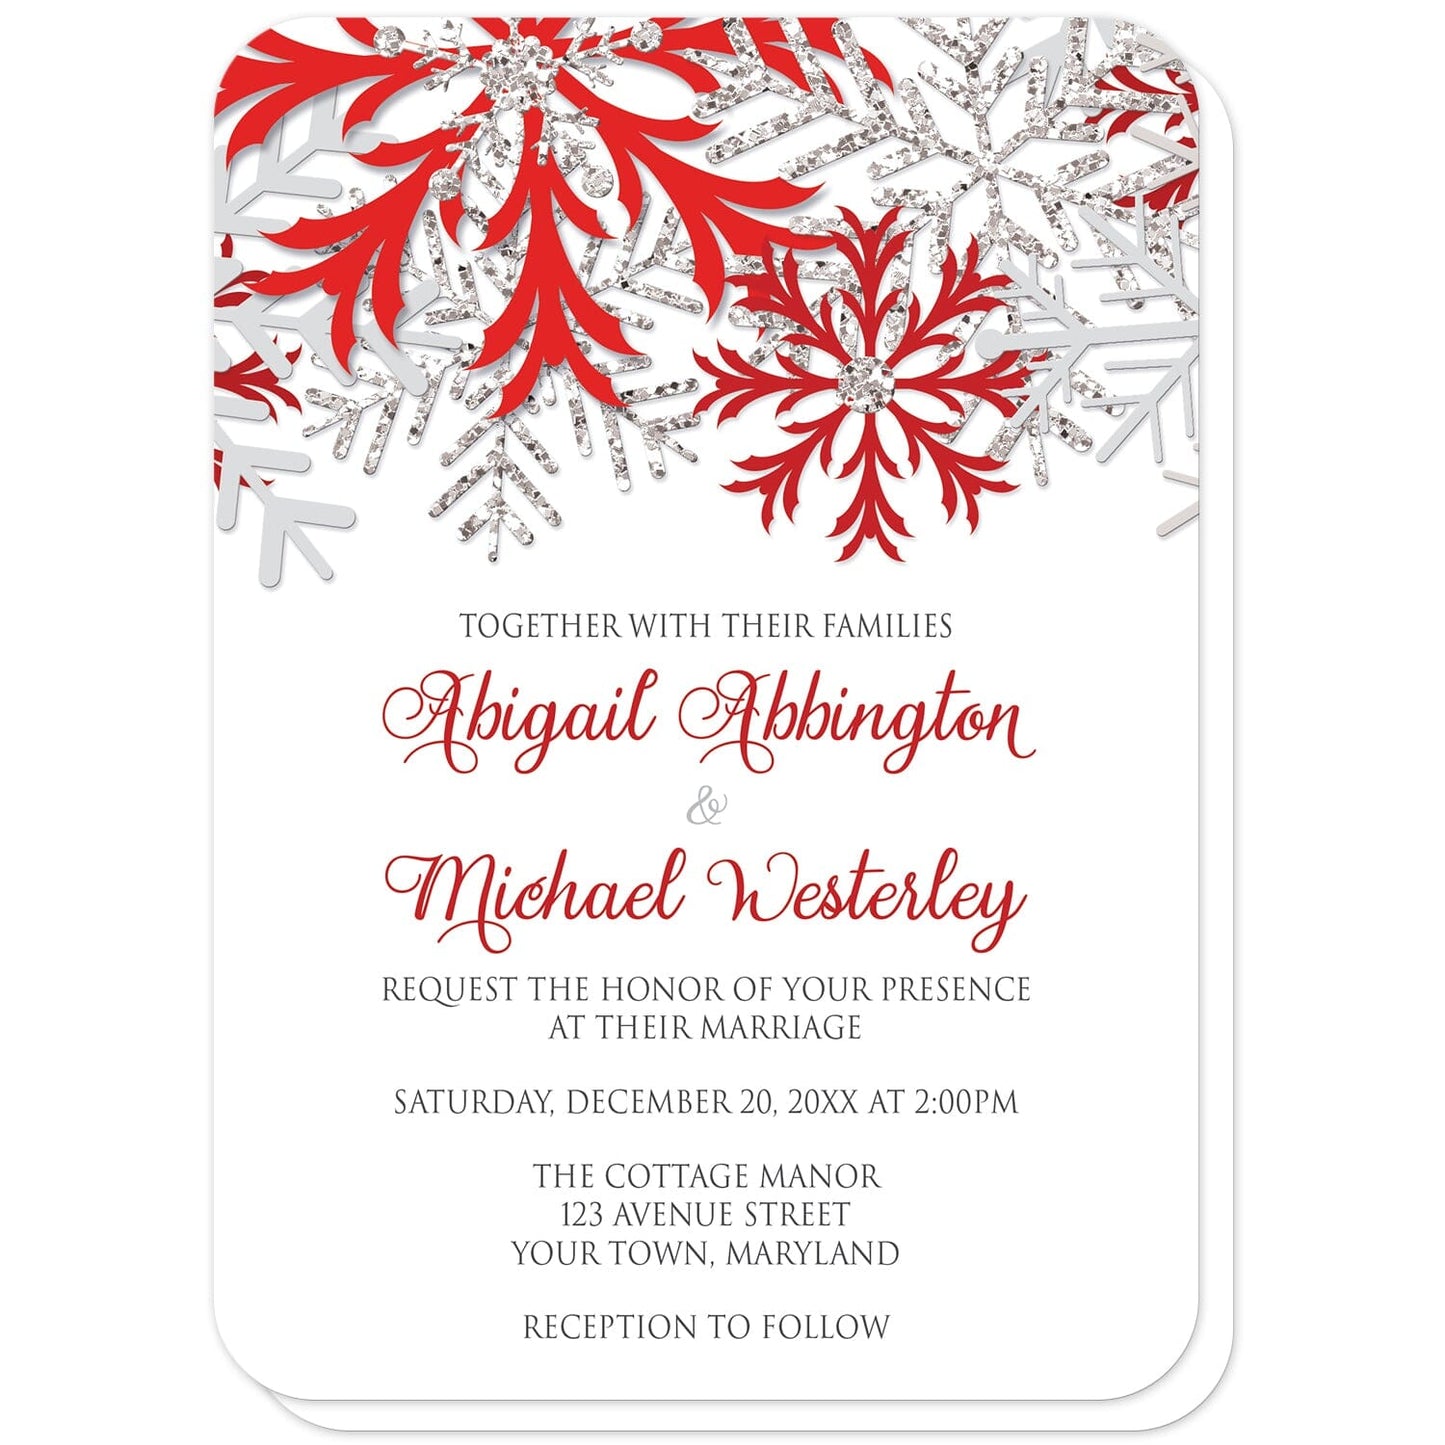 Winter Red Silver Snowflake Wedding Invitations (with rounded corners) at Artistically Invited. Beautiful winter red silver snowflake wedding invitations designed with red, darker red, silver-colored glitter-illustrated, and light gray snowflakes along the top over a white background. Your personalized marriage celebration details are custom printed in red and gray below the pretty snowflakes.